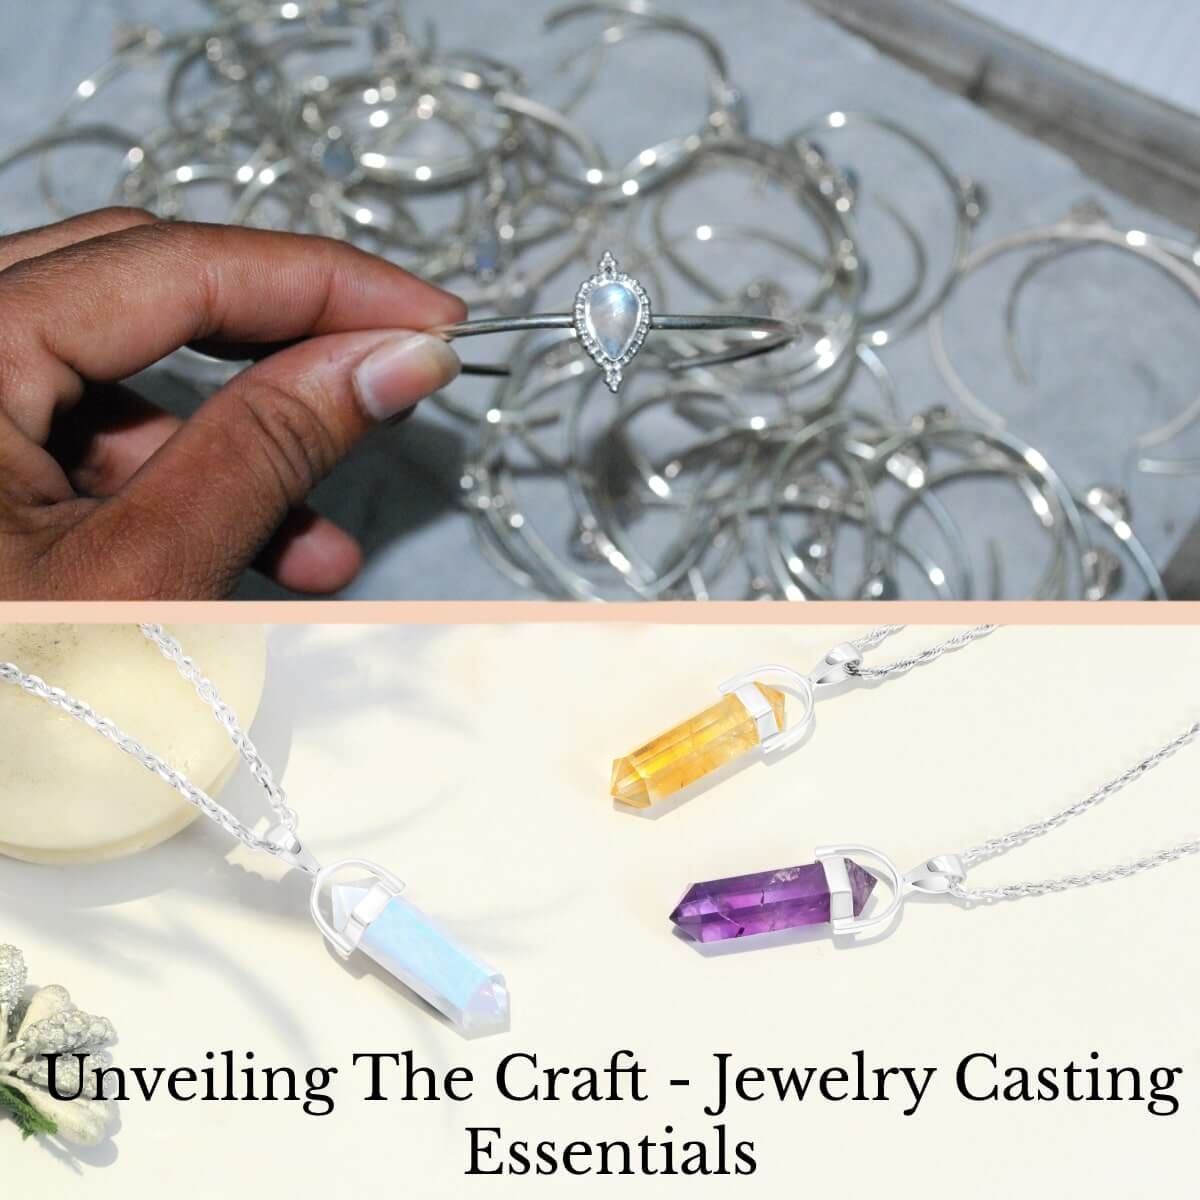 Tools and Equipment Used in Casting Jewelry